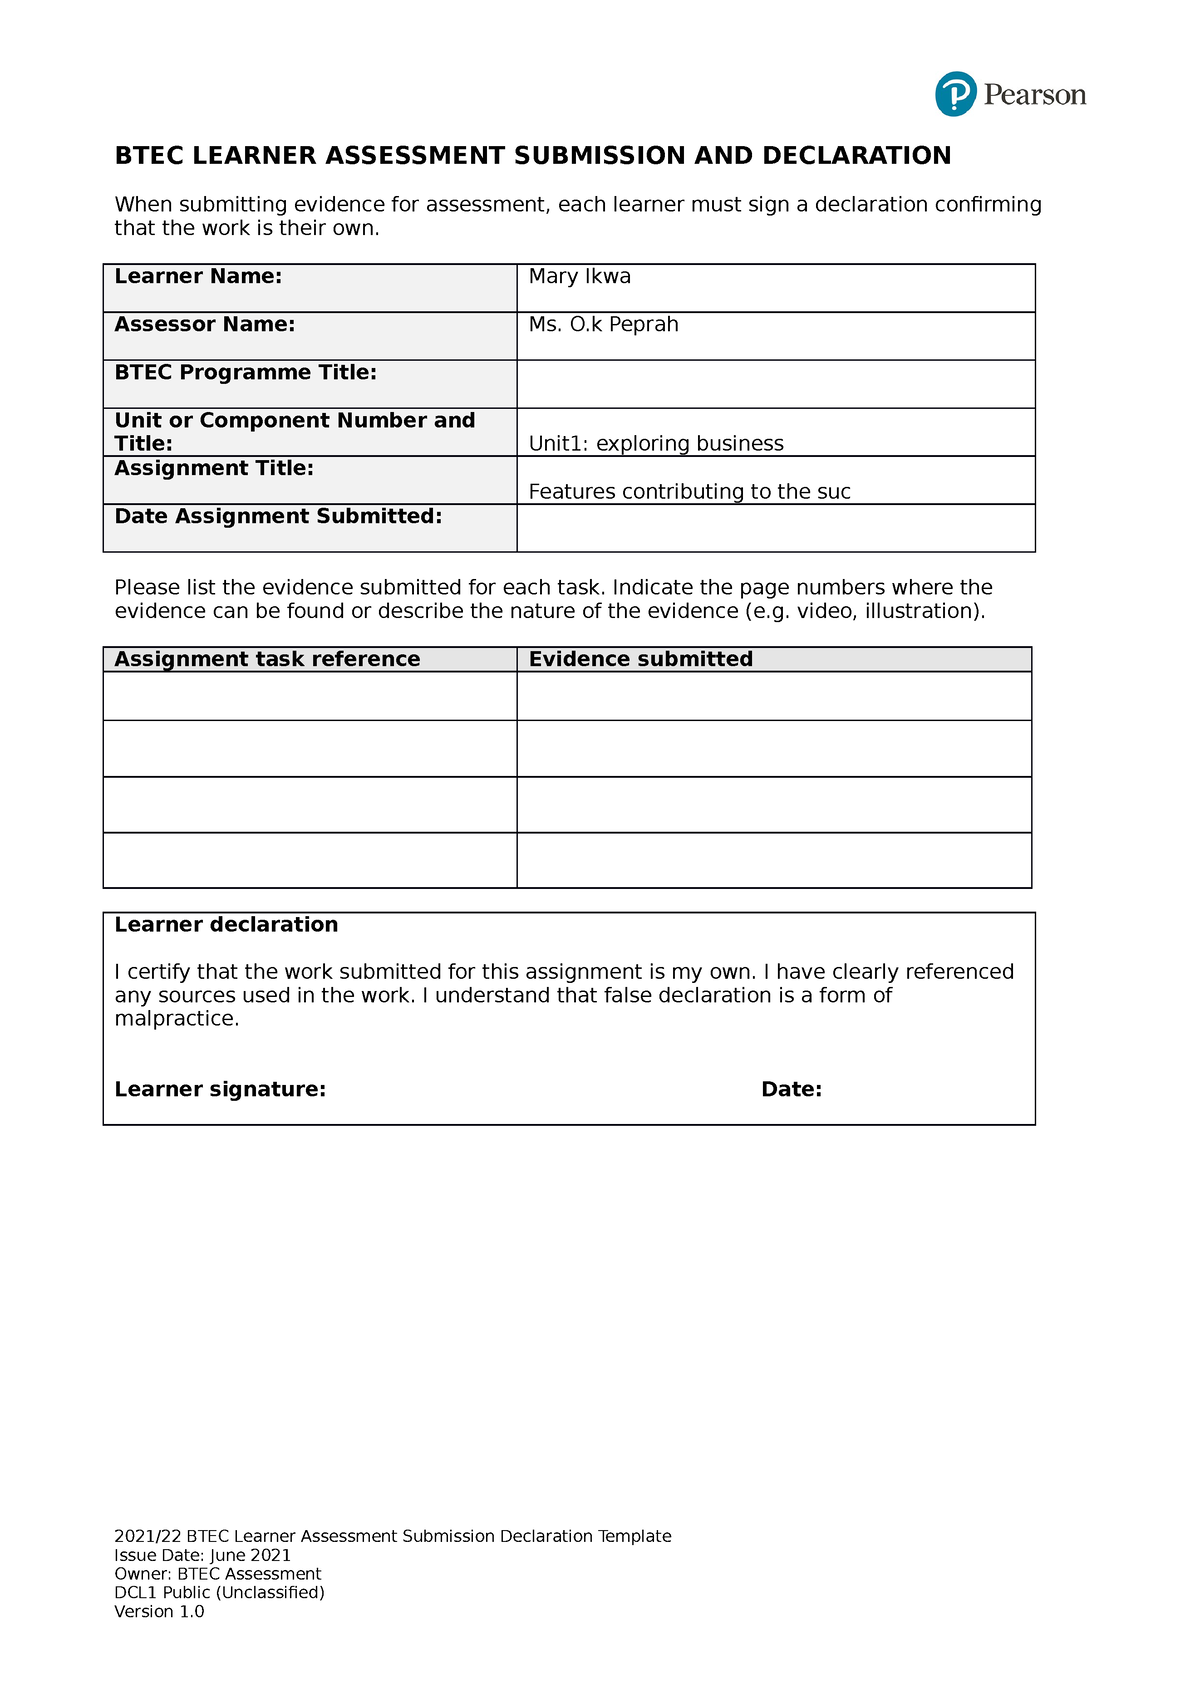 Btec learner assessment submission declaration template BTEC LEARNER